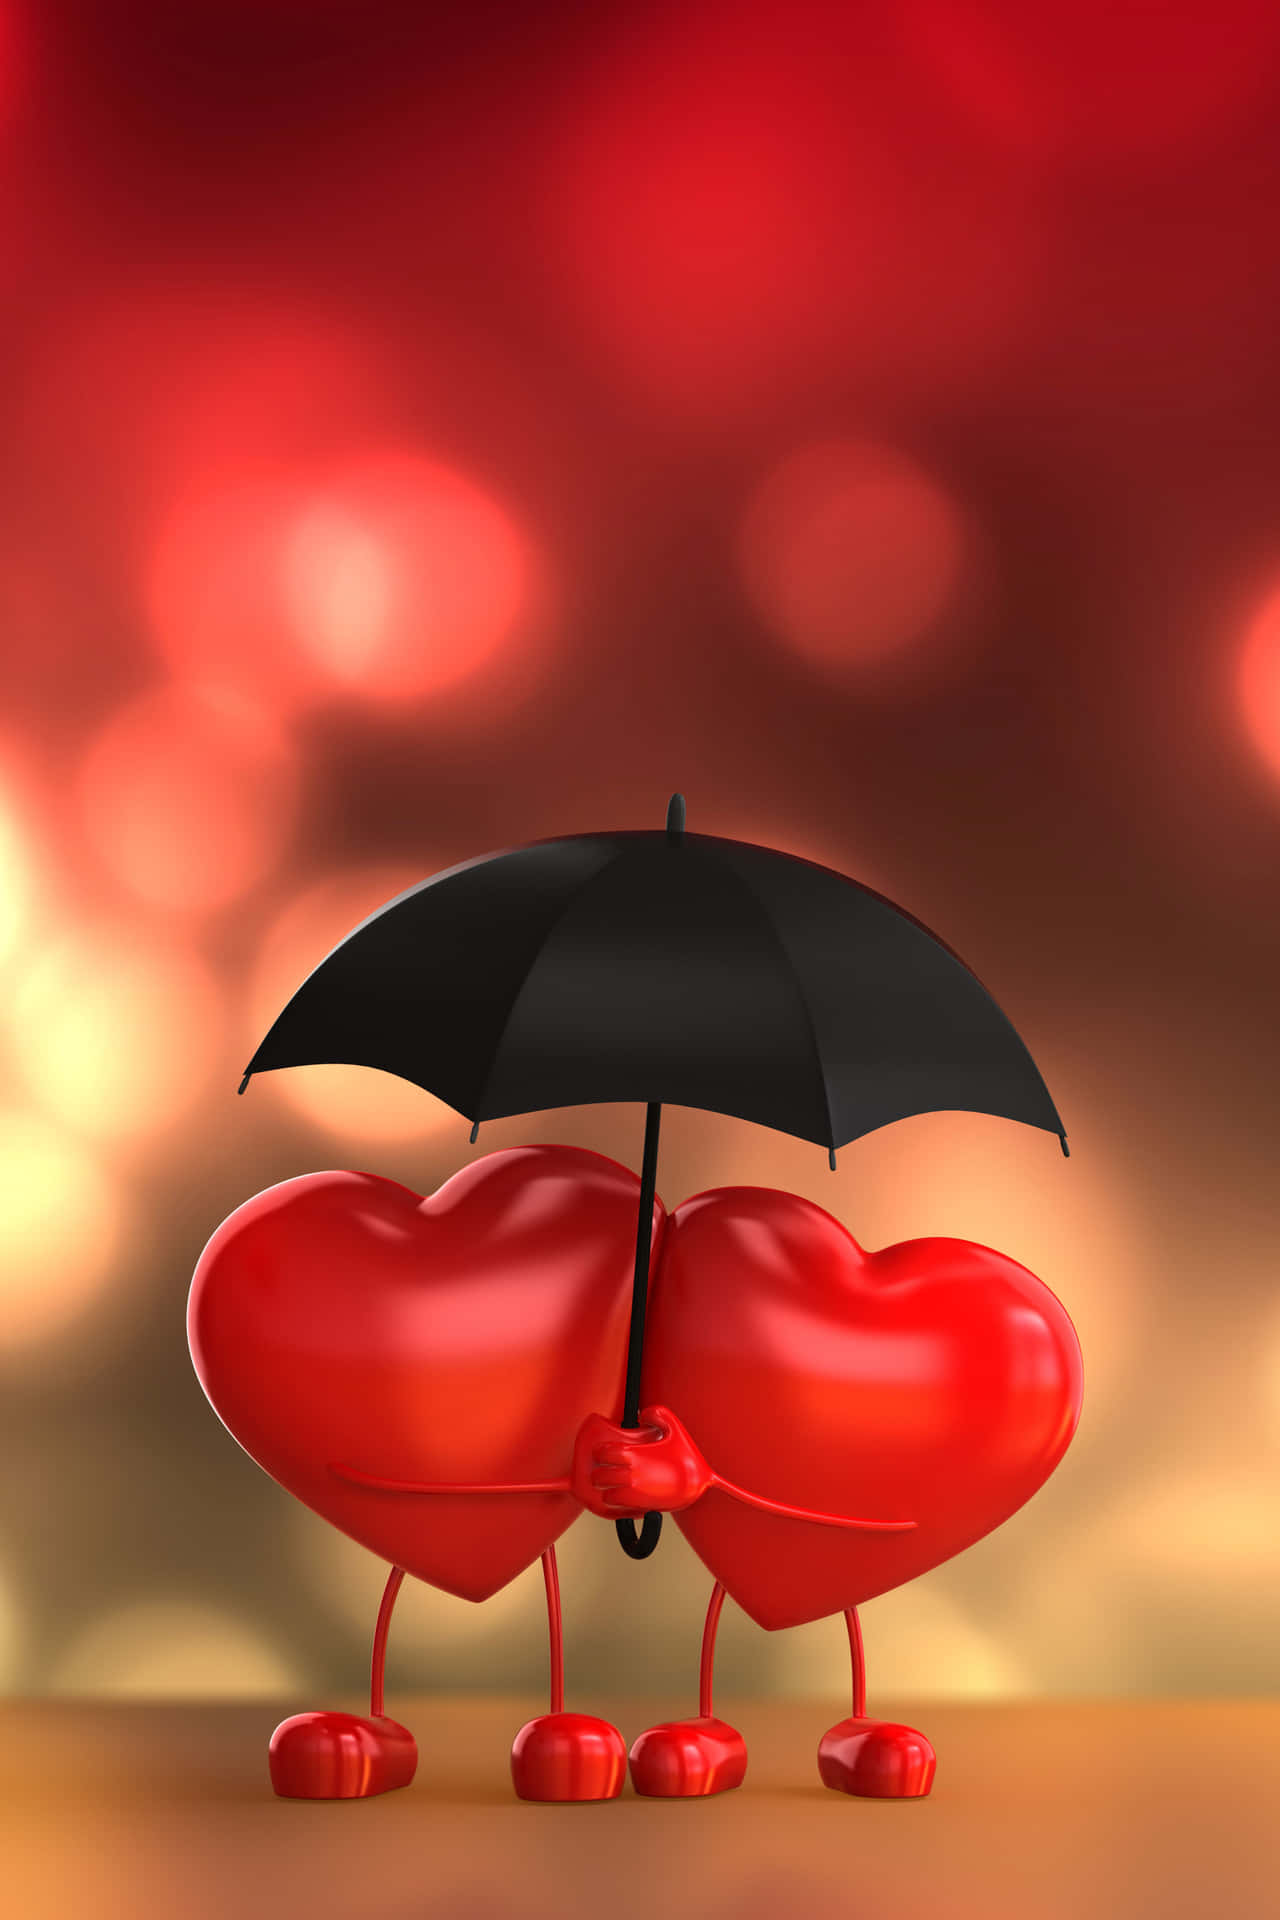 Two Red Hearts Holding An Umbrella